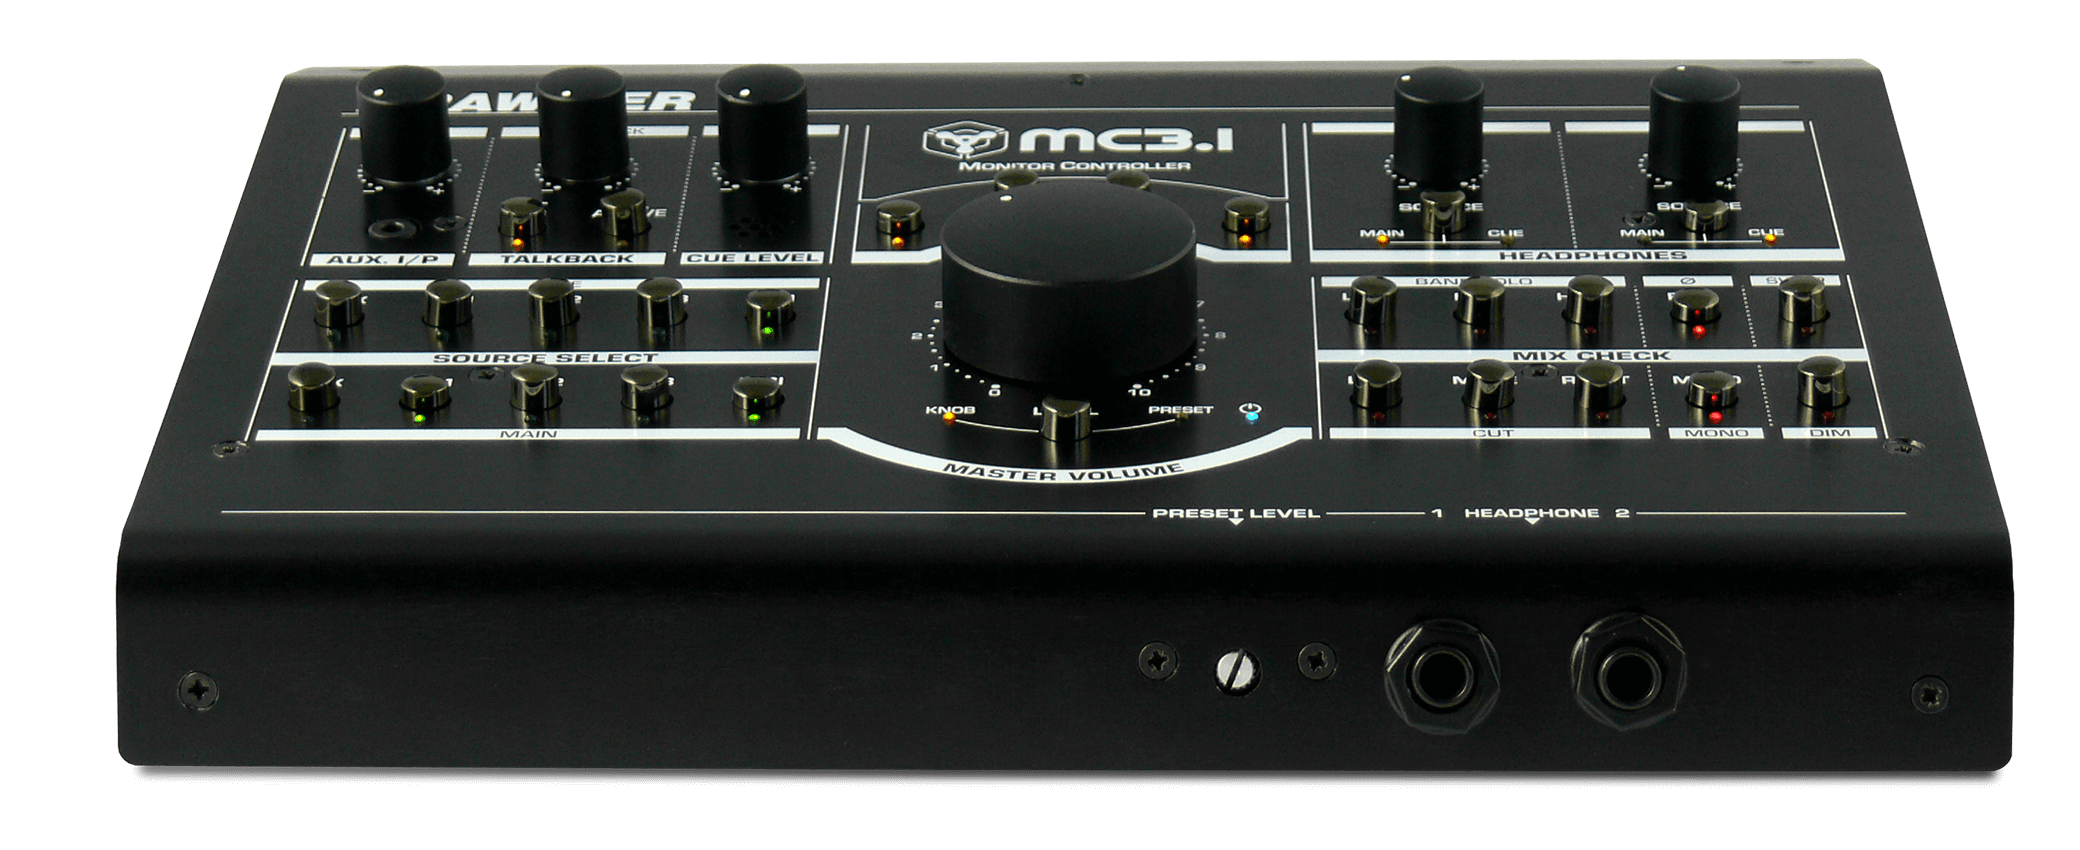 Front view of the MC3.1 showing the volume trim and headphone jacks